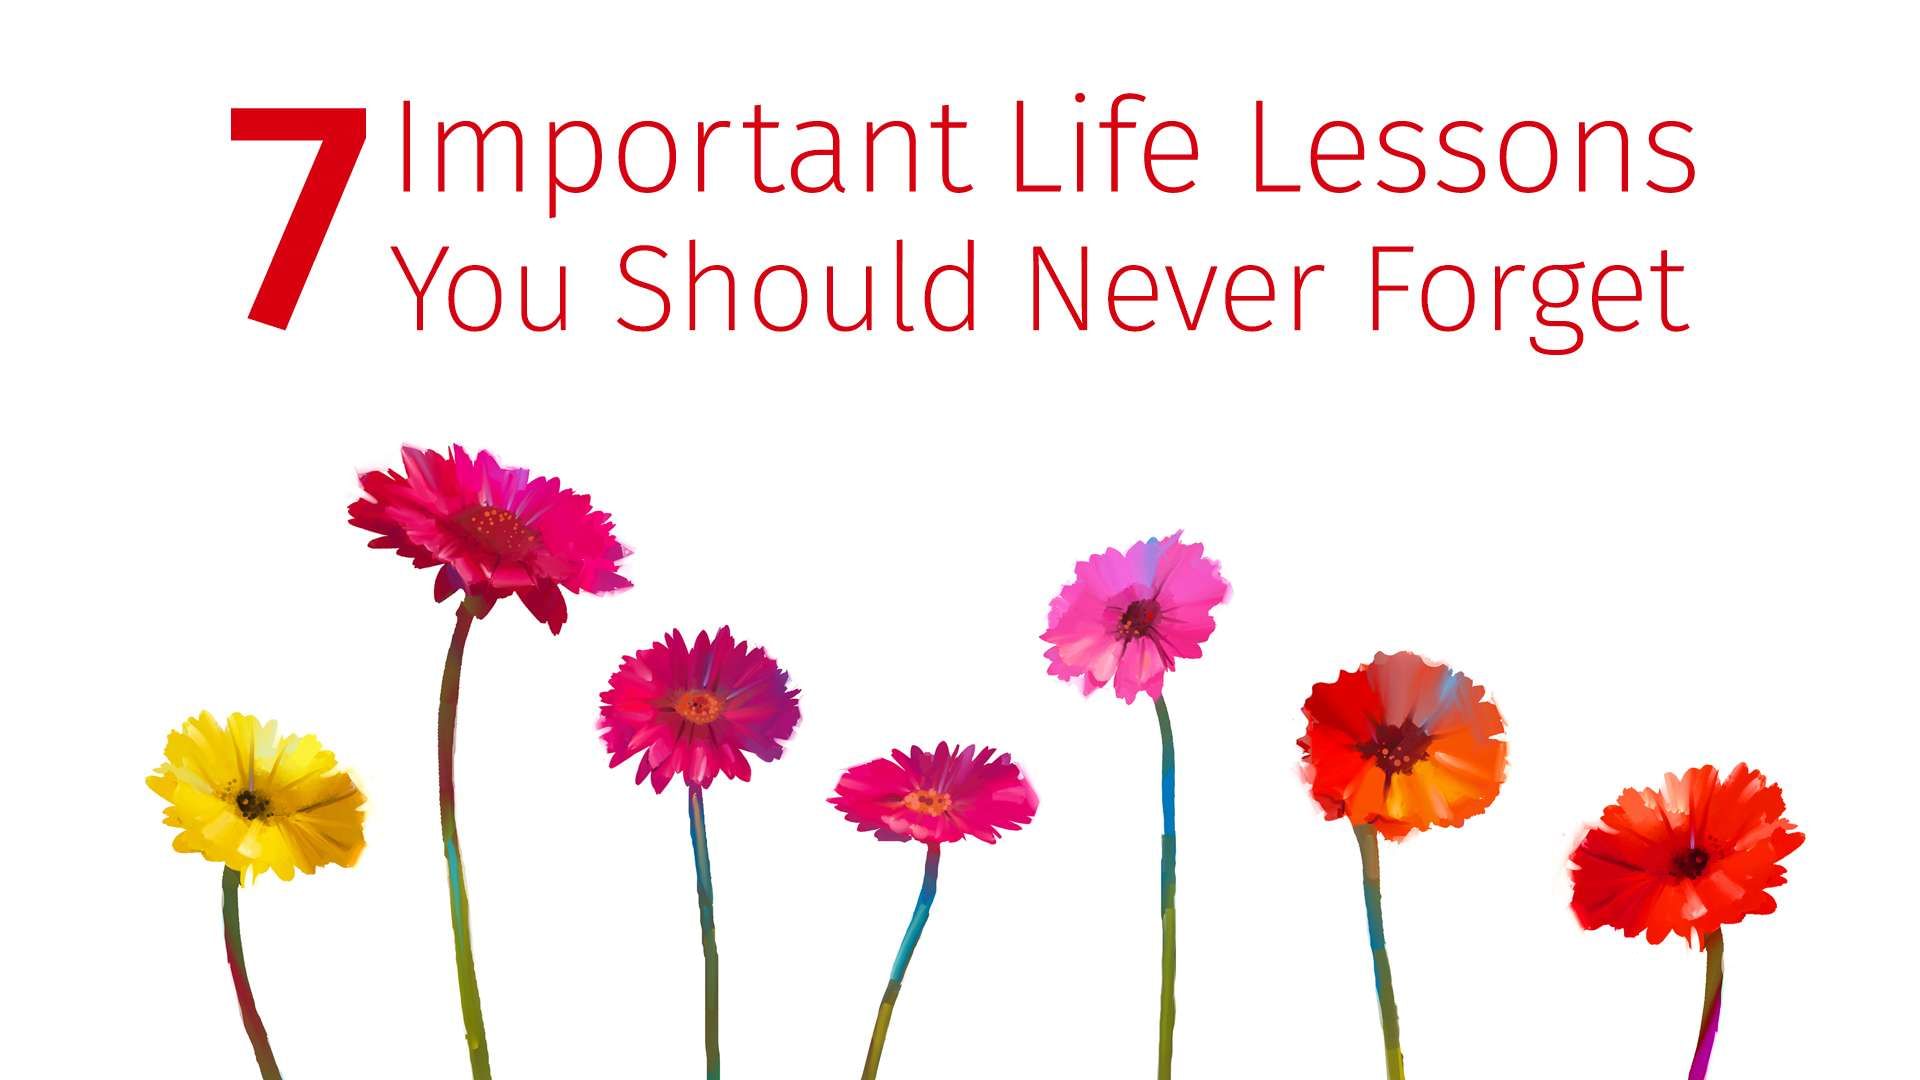 7 Important Life Lessons You Should Never Forget